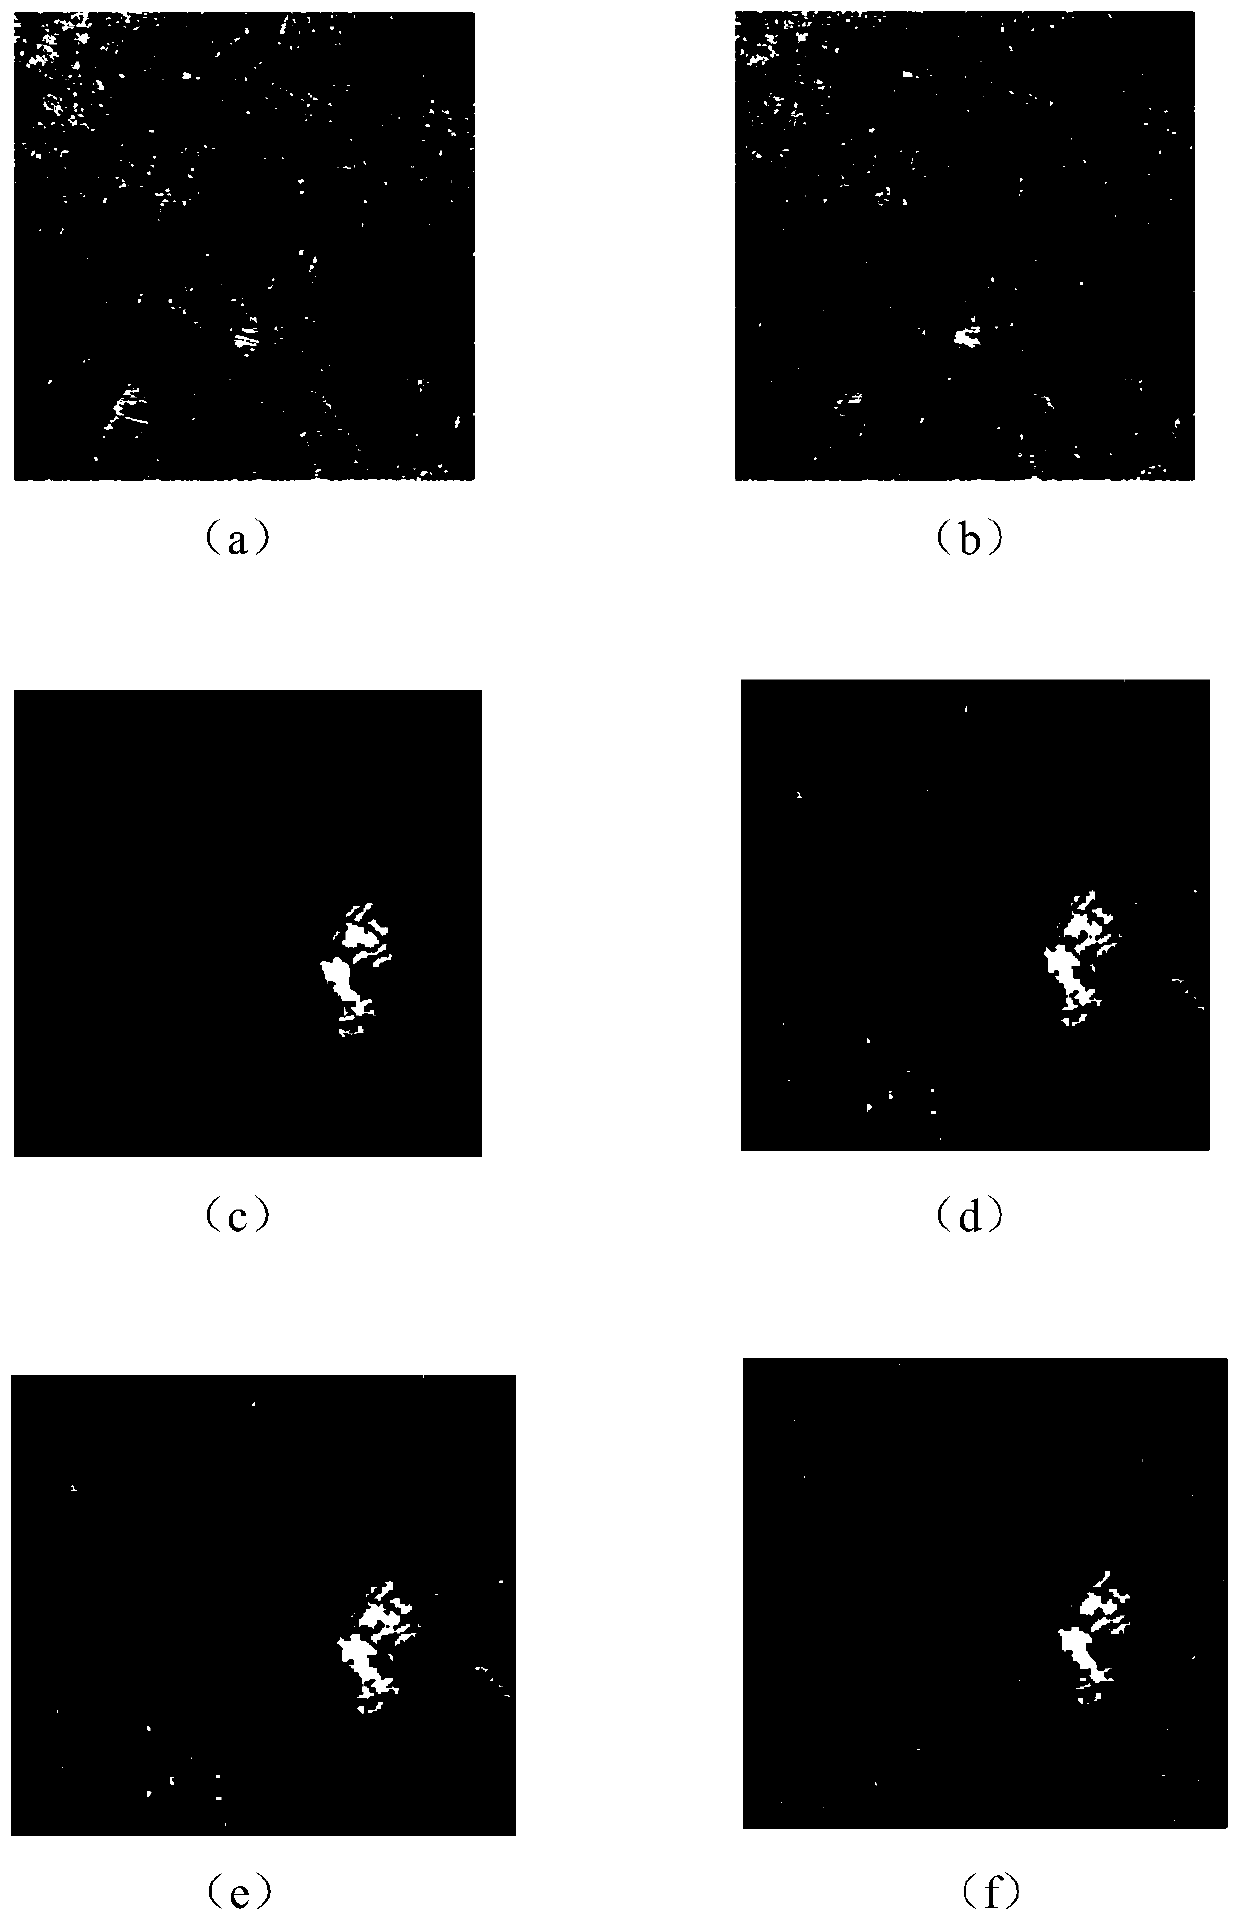 Algorithm for detection of changing regions in sar images based on self-paced learning